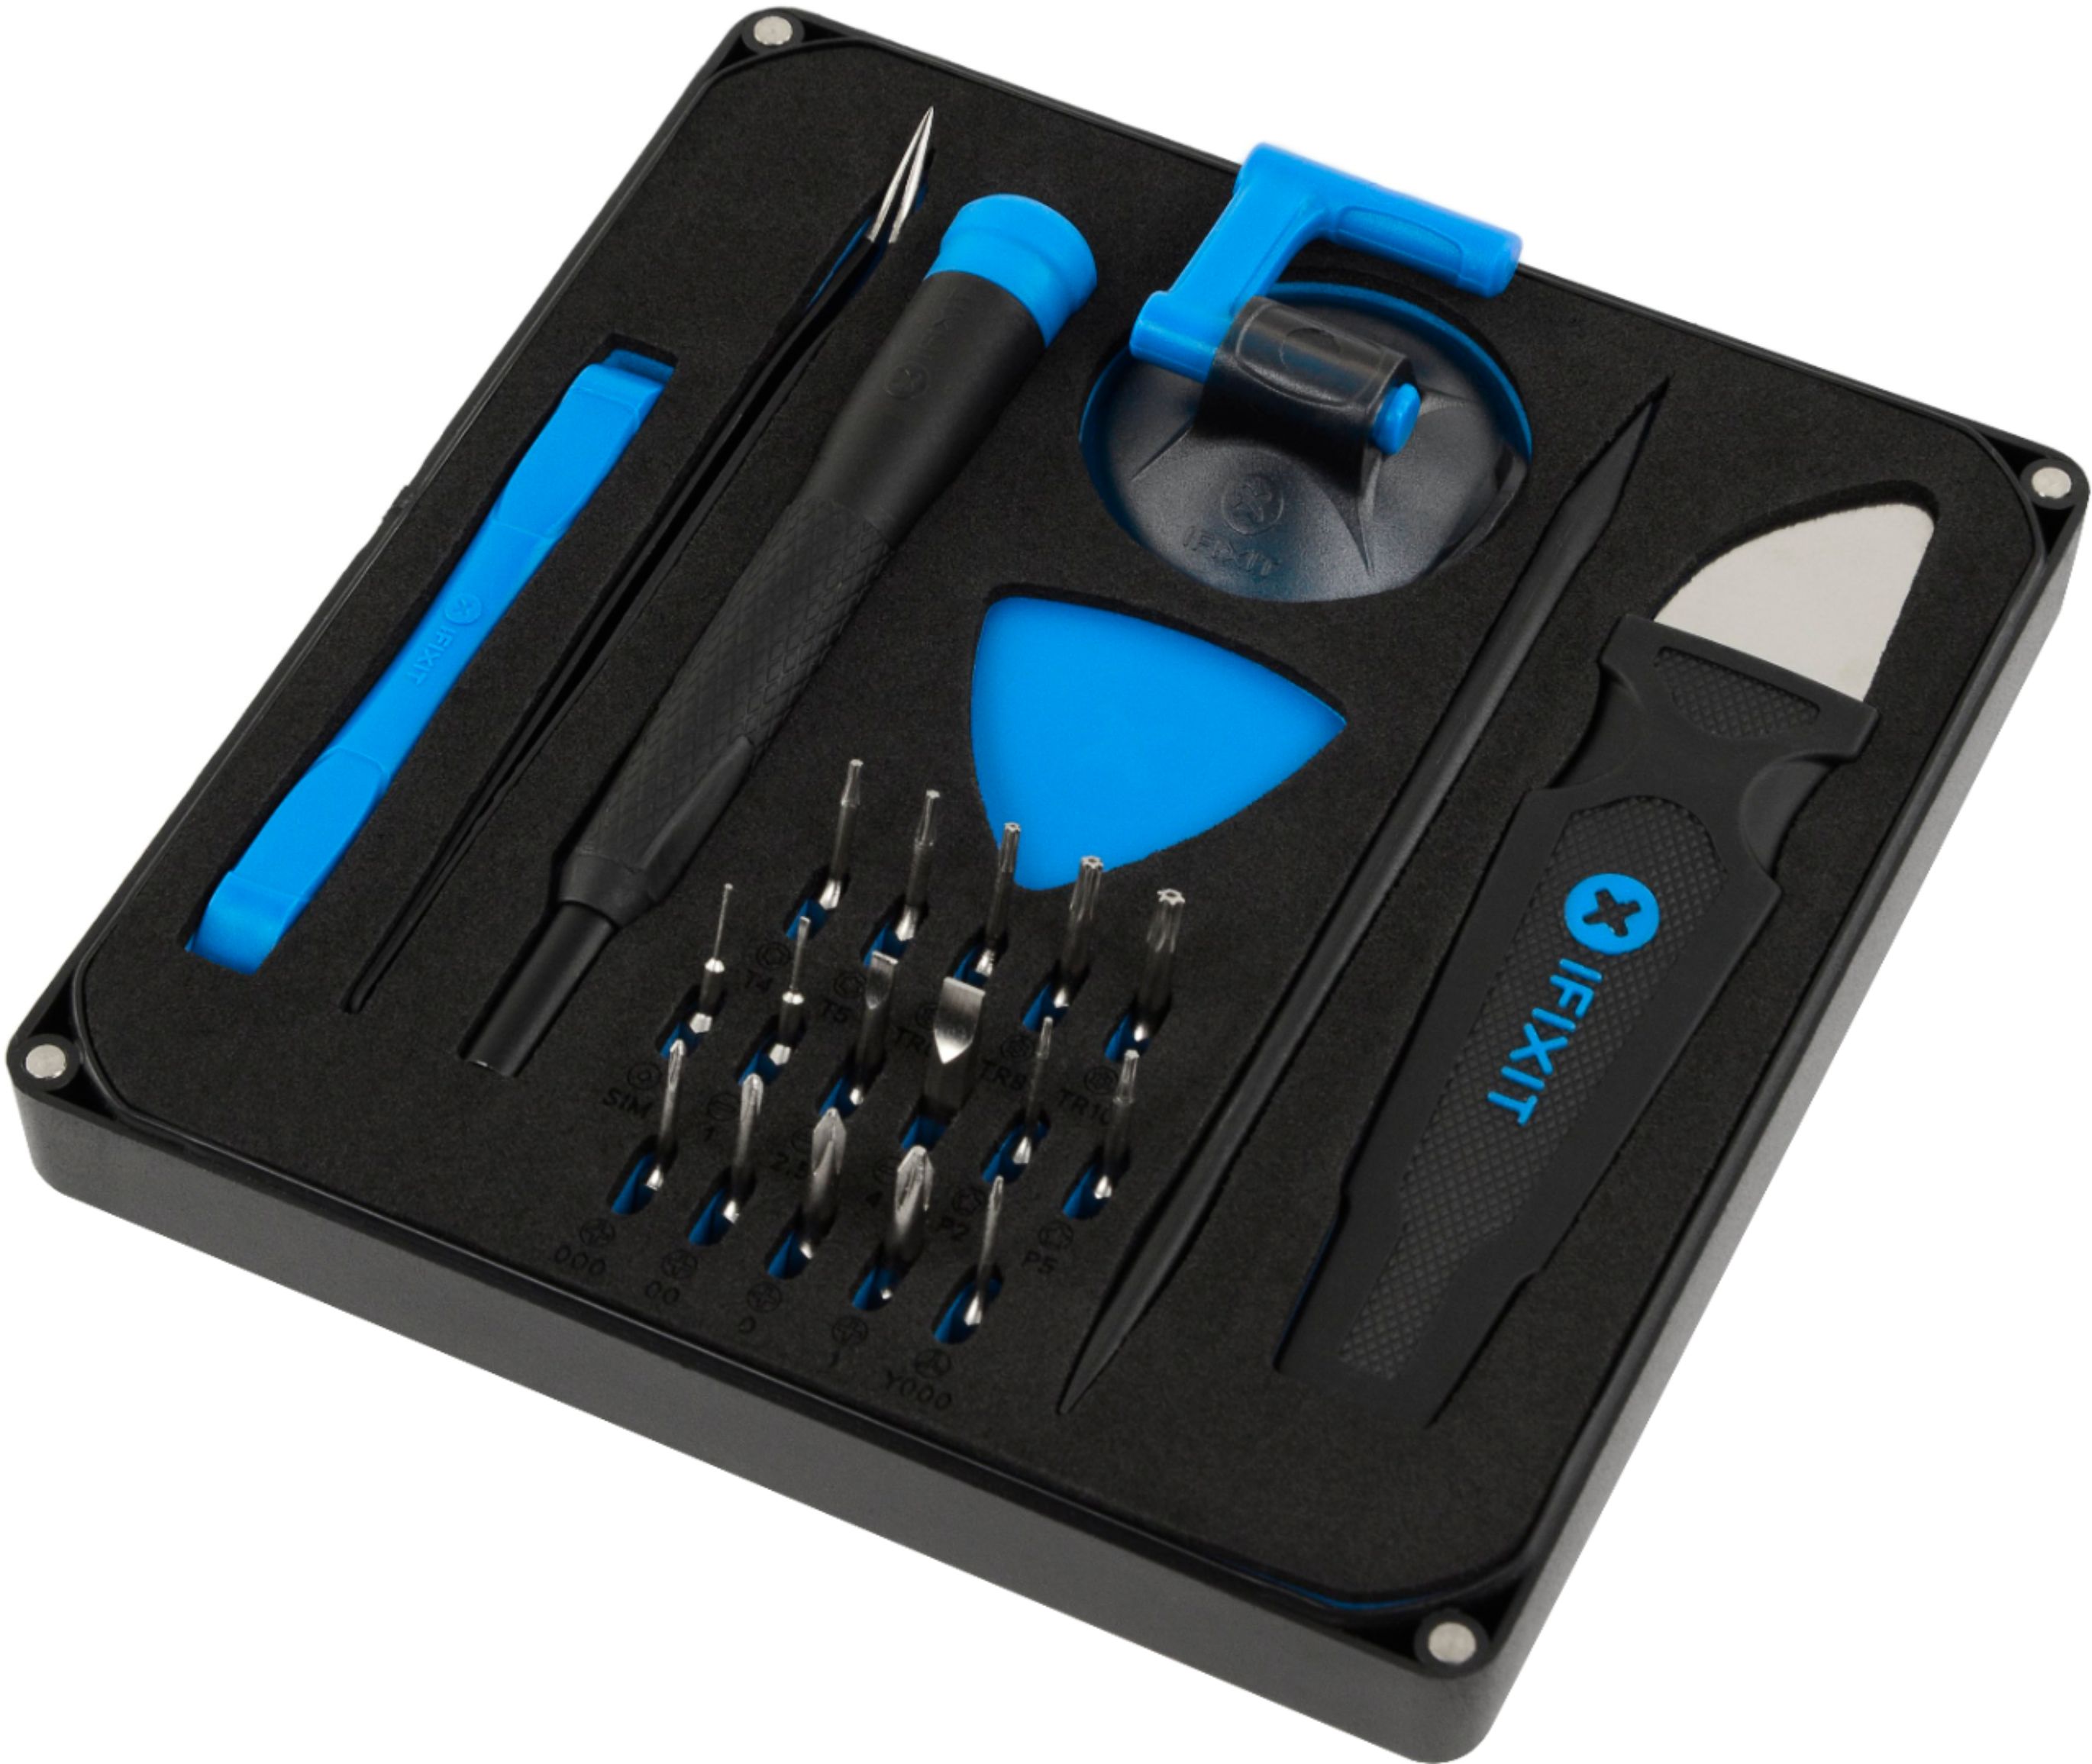 I got myself the Ifixit toolkit. It's a bunch of amazing tools to have for  all kinds of tech work. It contains all bits you need and additional things  usefull even outside